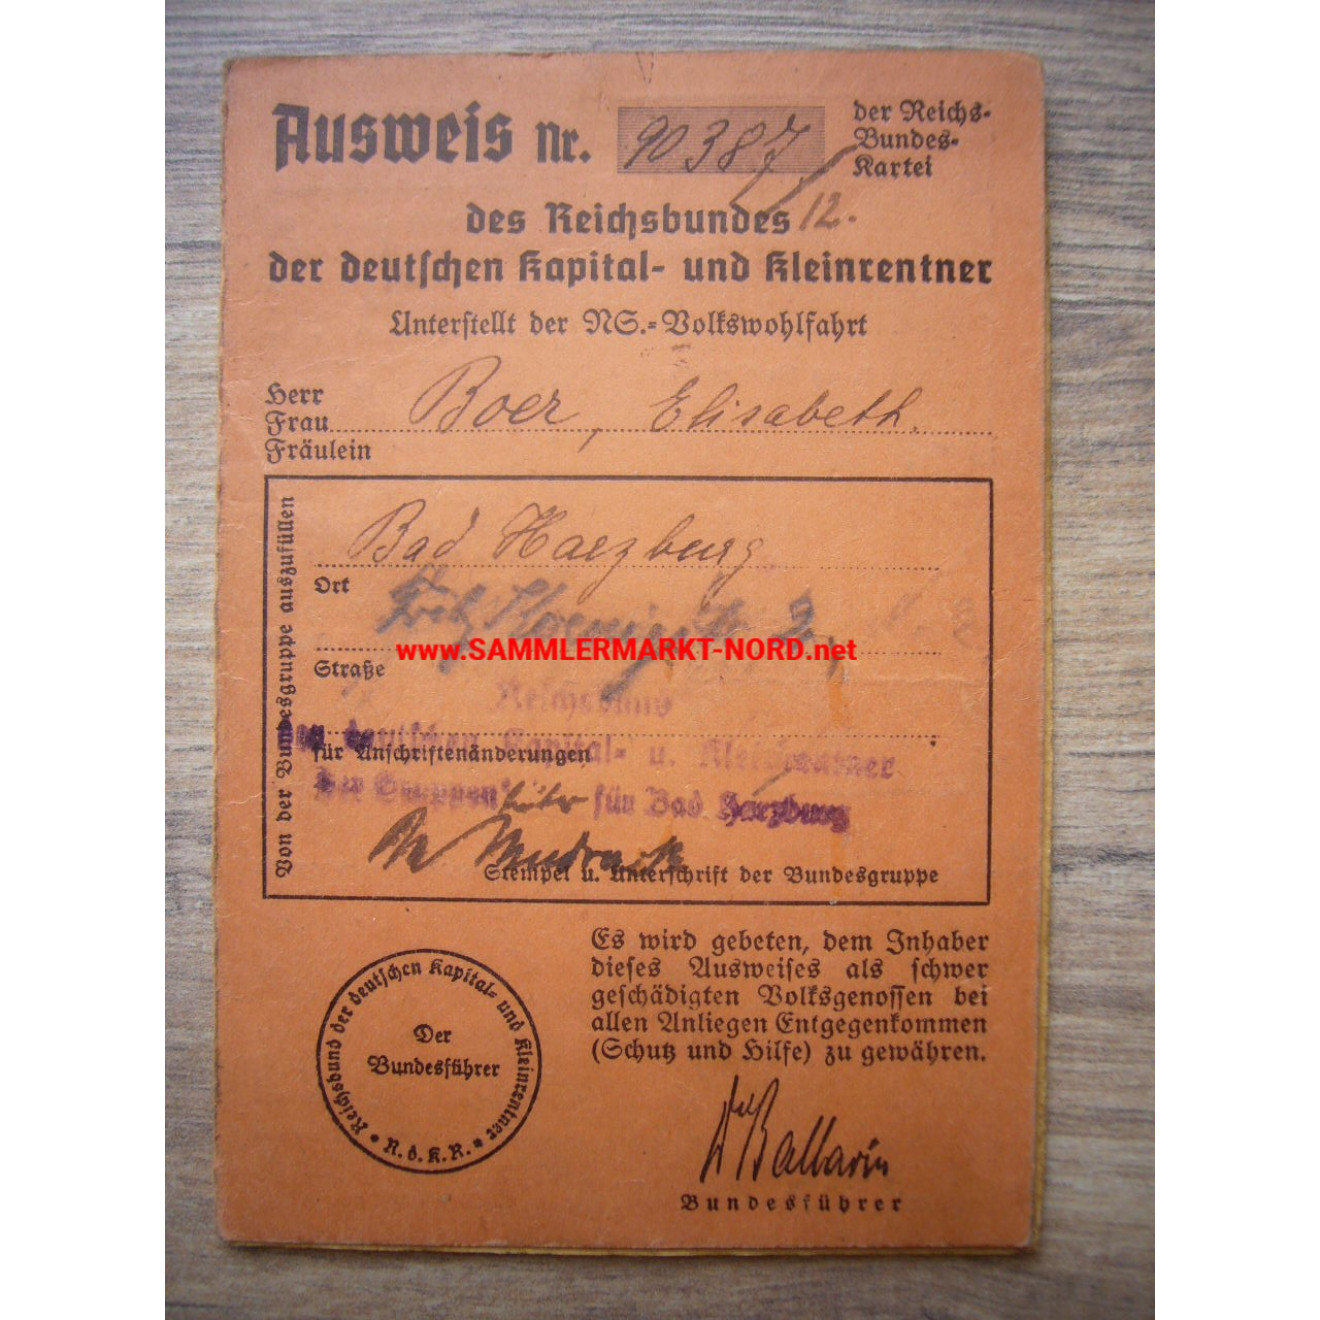 Federation of German Capital and Small Pensioners - ID card